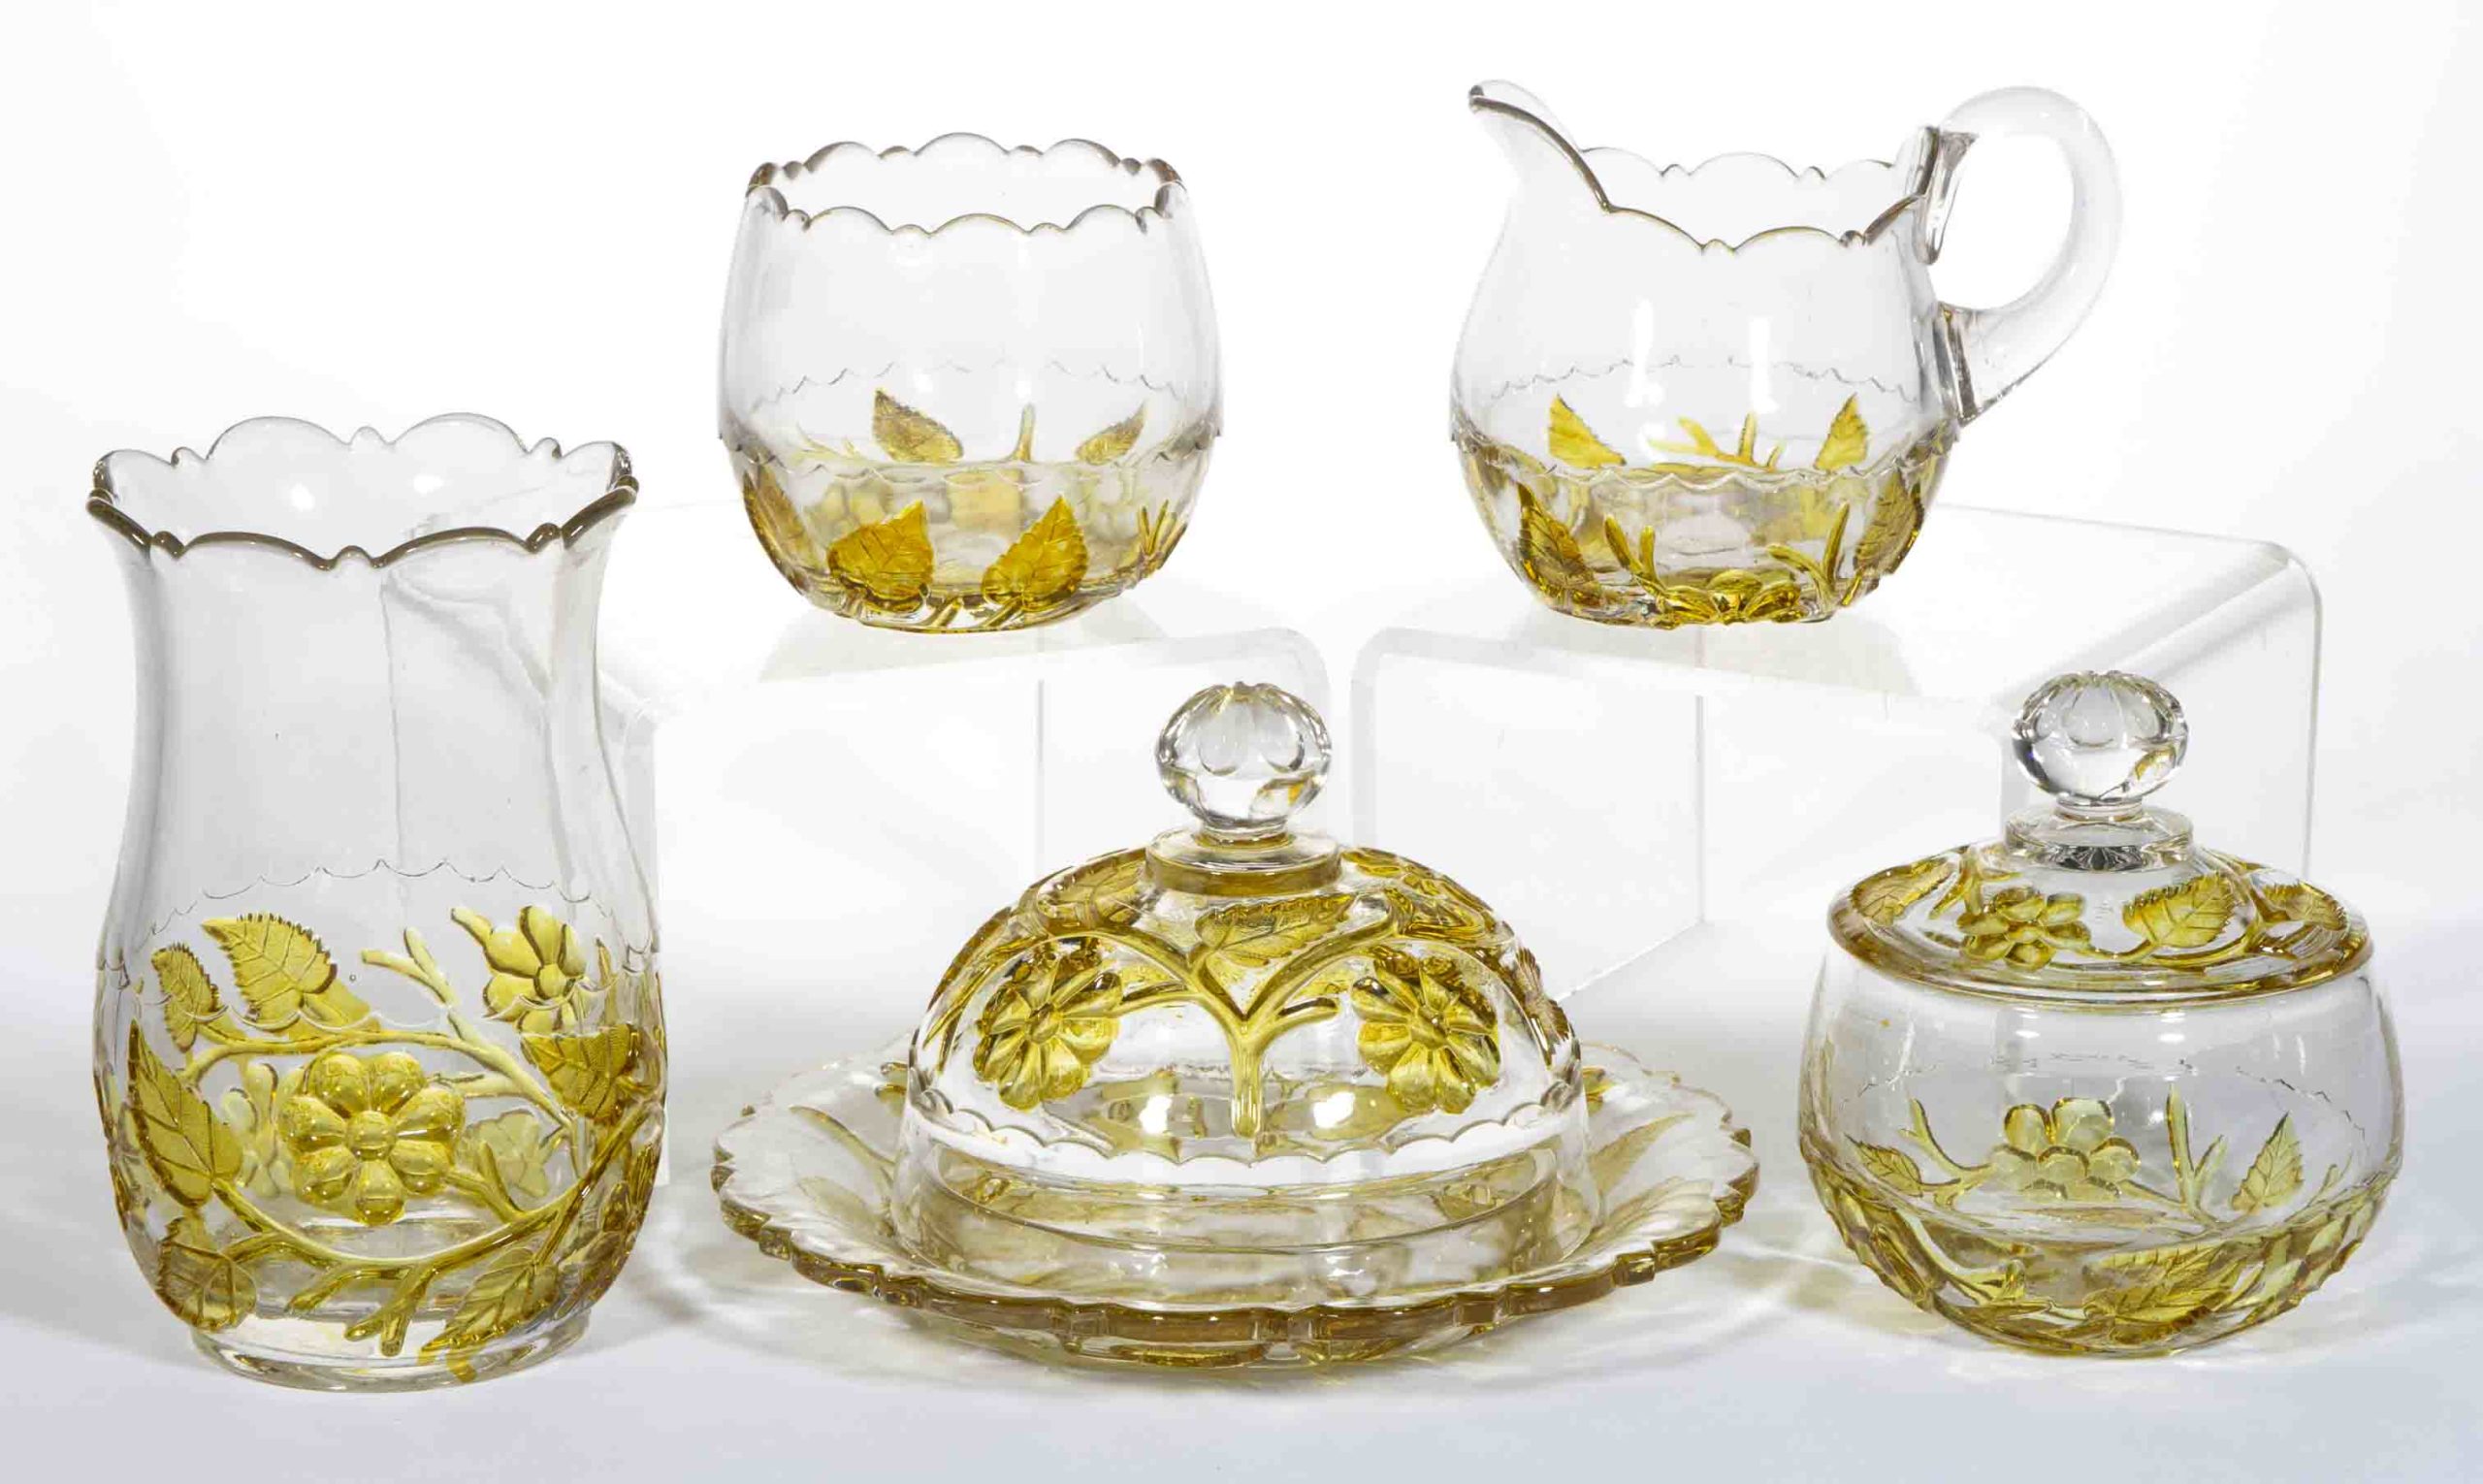 HOBBS NO. 339 / LEAF AND FLOWER – AMBER-STAINED FIVE-PIECE TABLE SET,